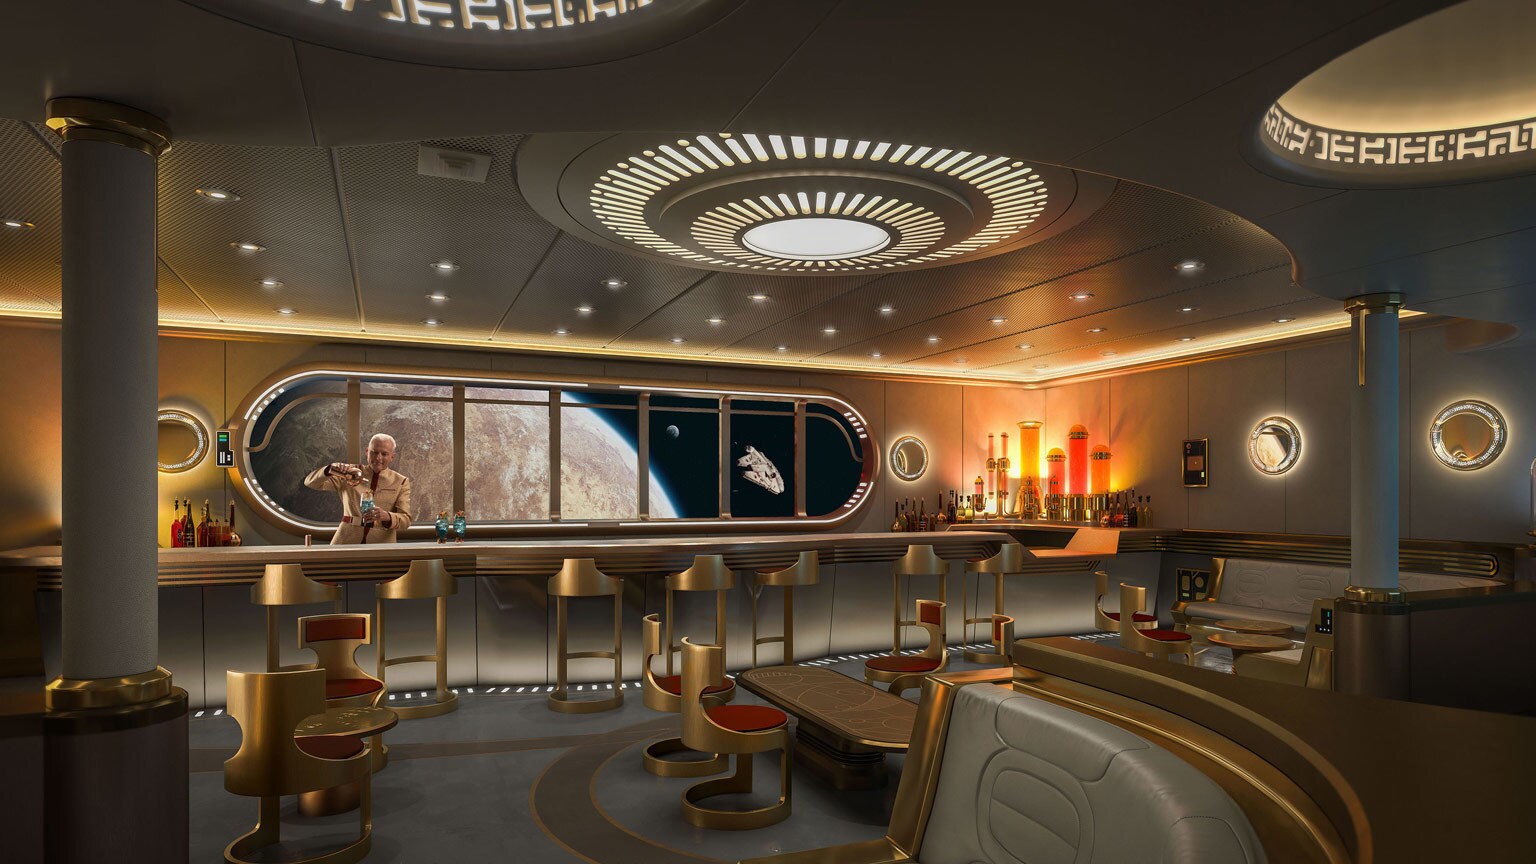 How Disney Cruise Line’s "Star Wars: Hyperspace Lounge" Will Take Fans Around the Galaxy